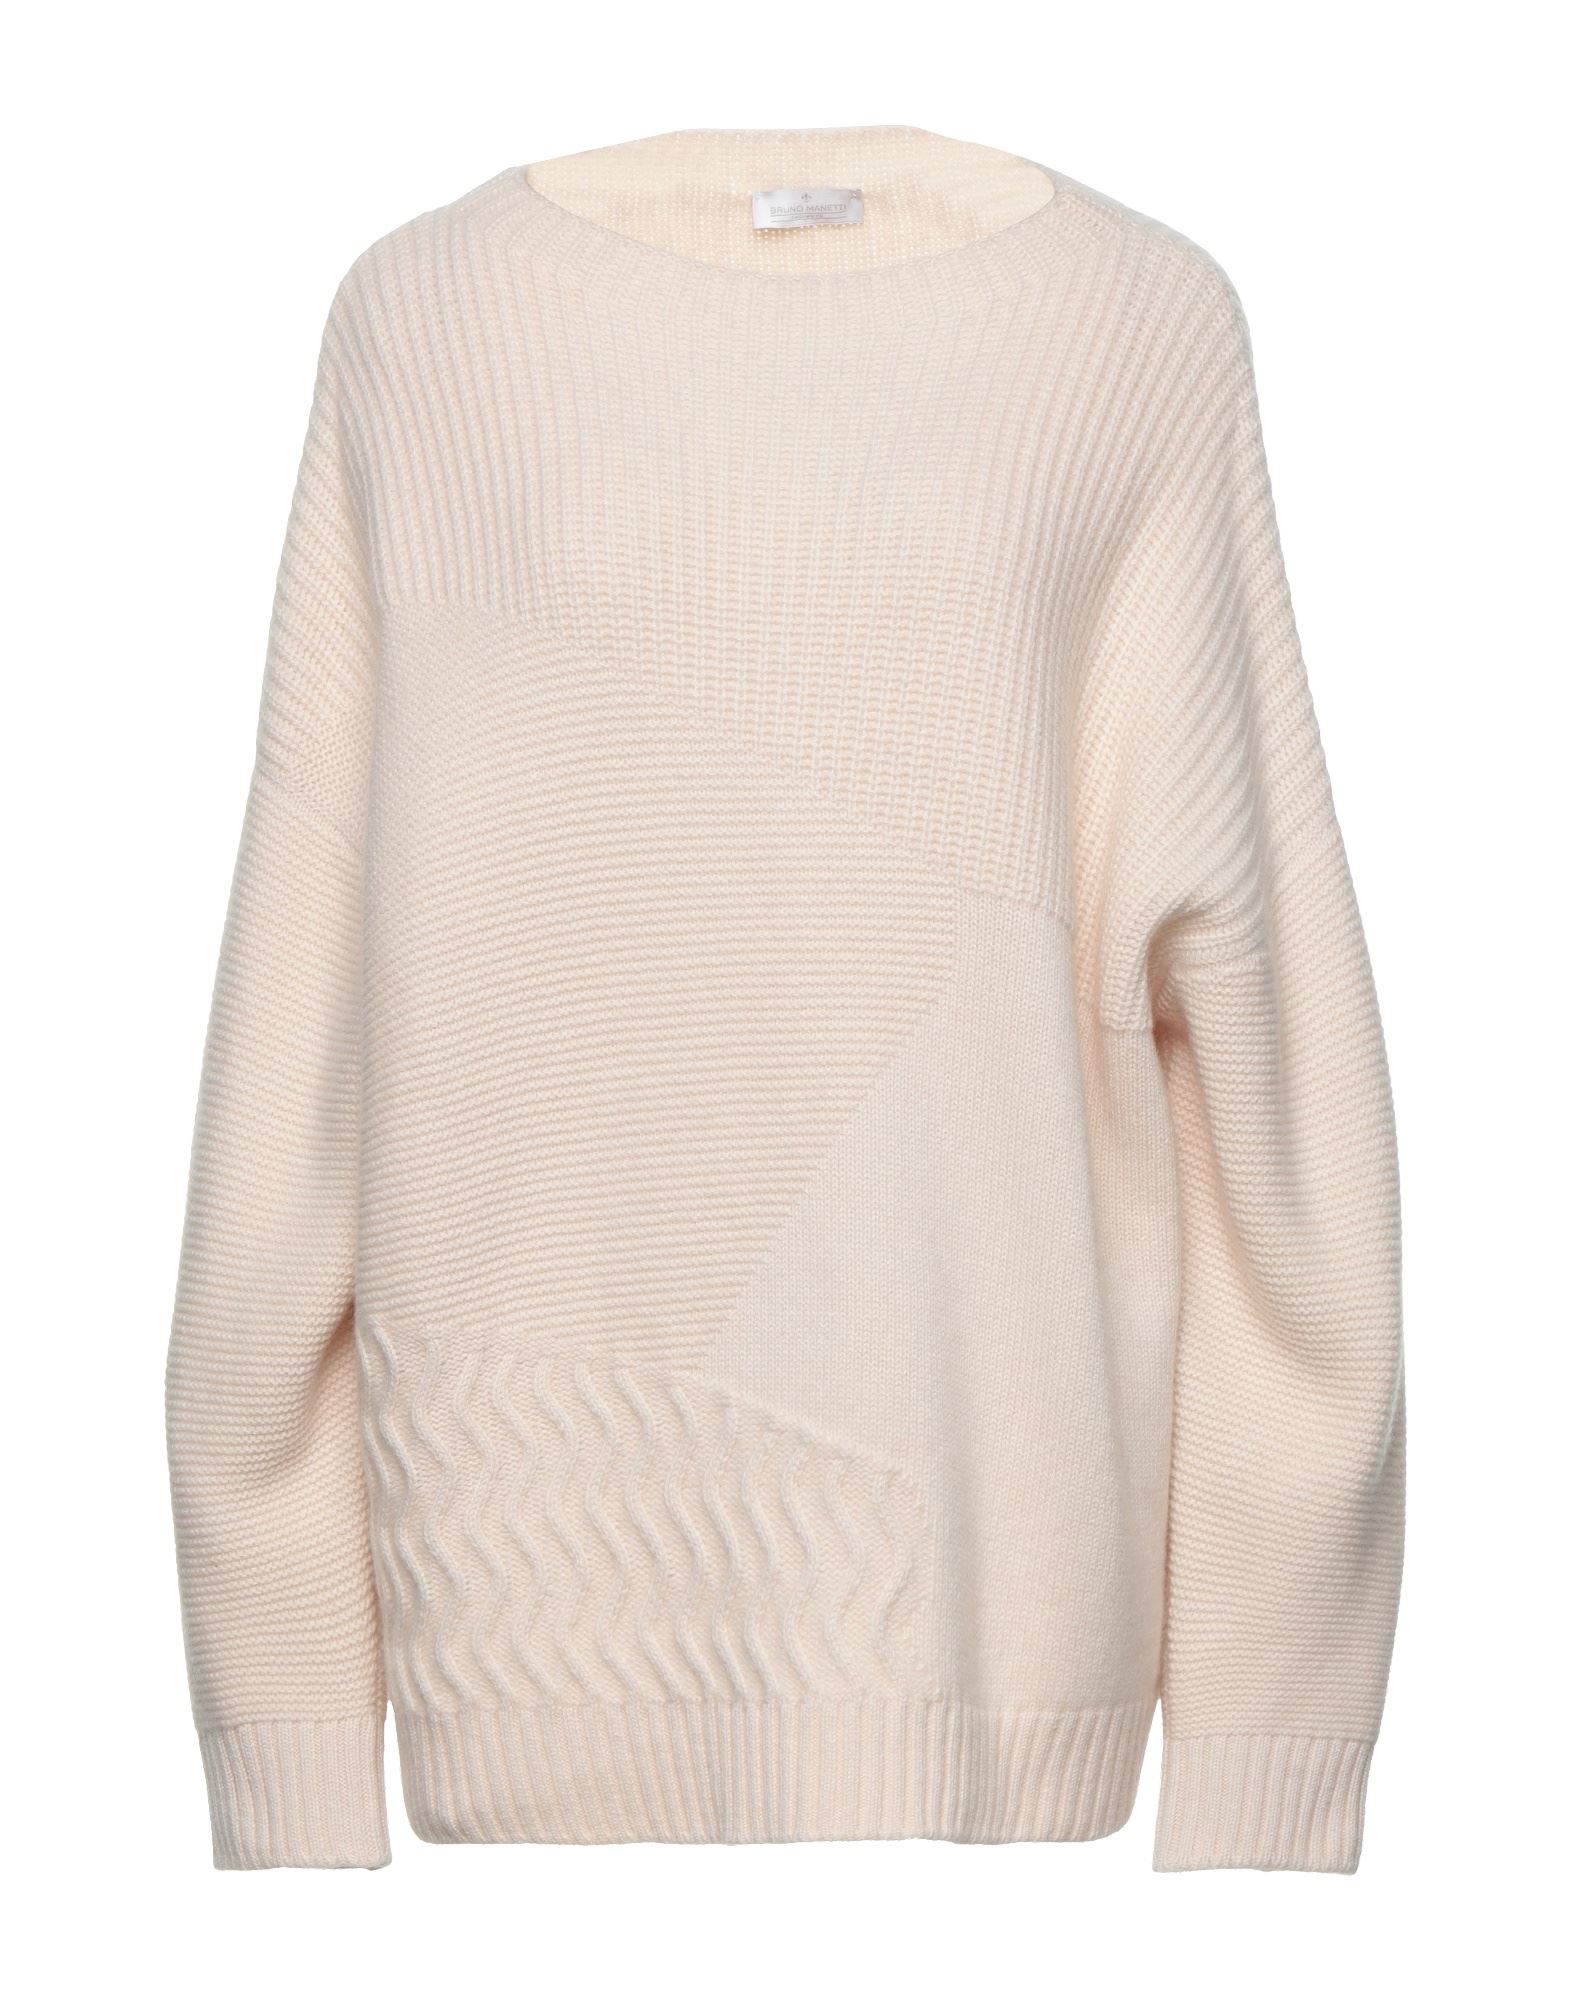 Bruno Manetti Sweaters In Light Pink | ModeSens